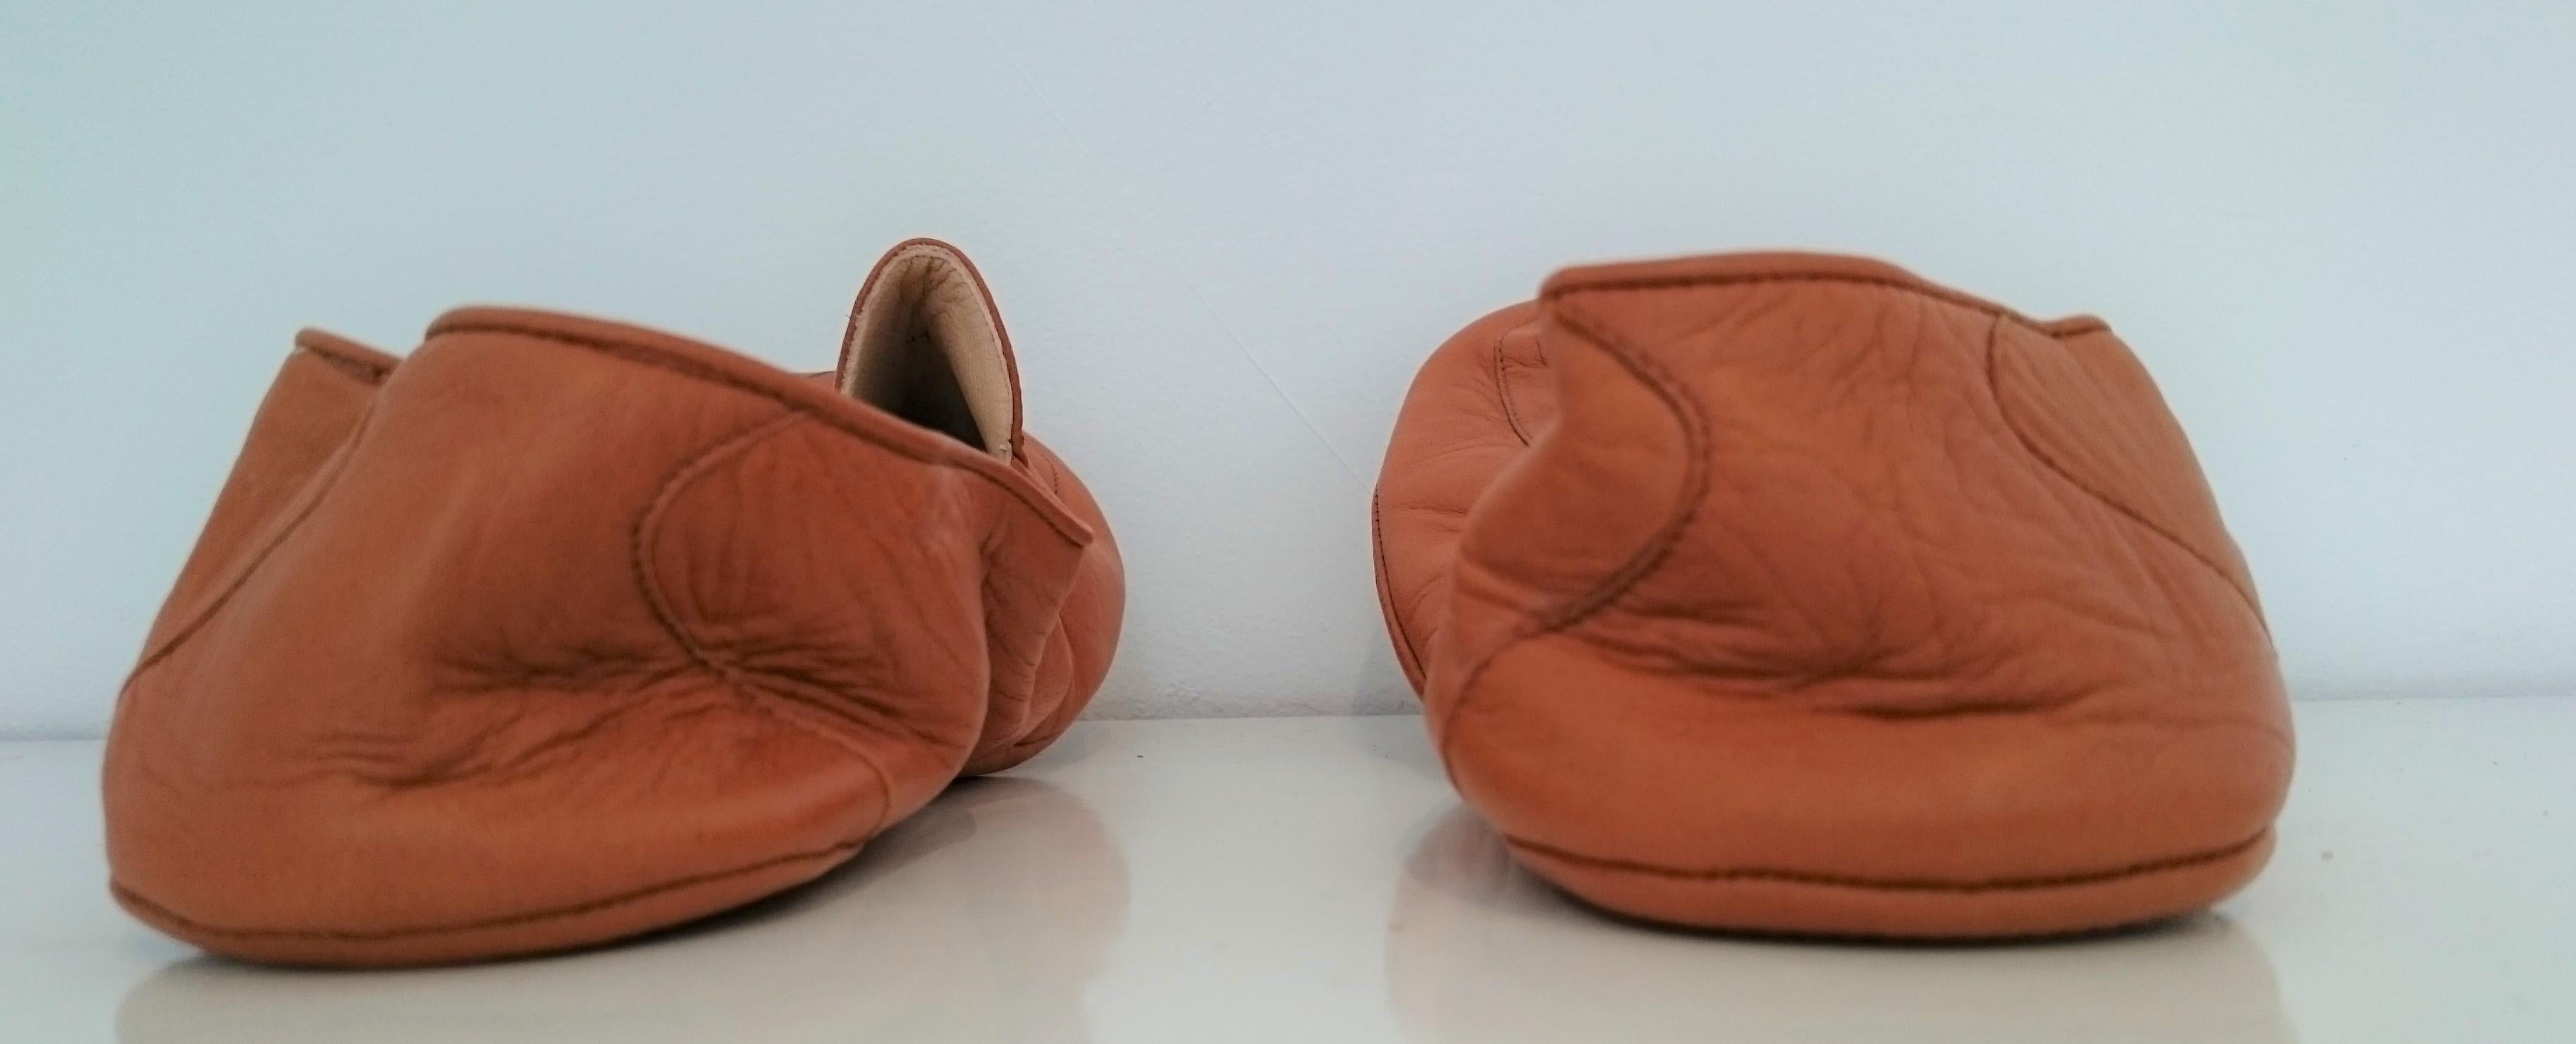 John Lobb Leather Slippers for Home. Size 41 (EU) 2